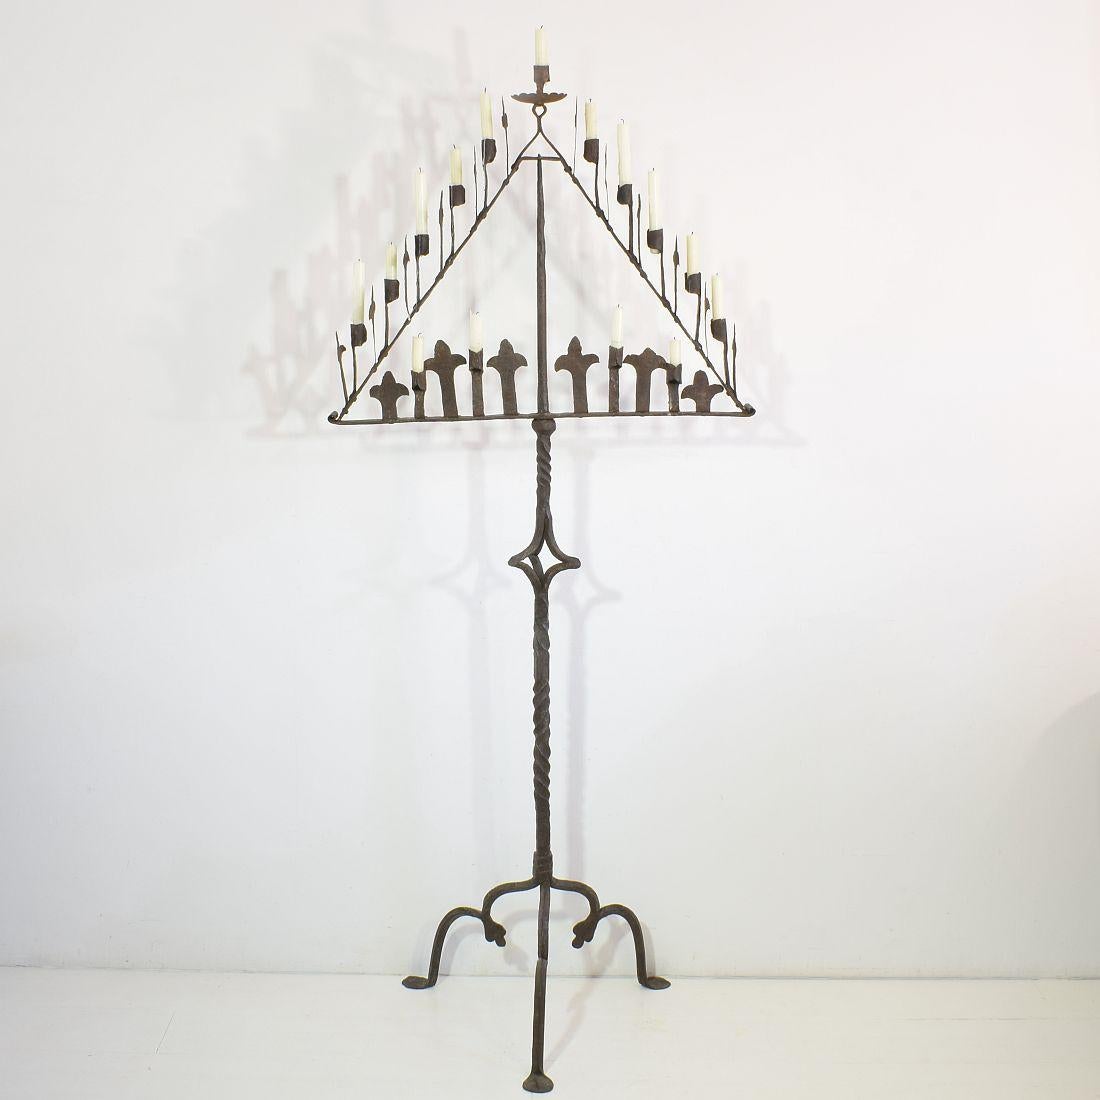 Wonderful hand forged Iron candleholder in Gothic style. 
Although the Gothic period was already over this style stayed popular for a long time in the French country side.
Very beautiful detailed with French Fleur de lyse ornaments. The Fleur de